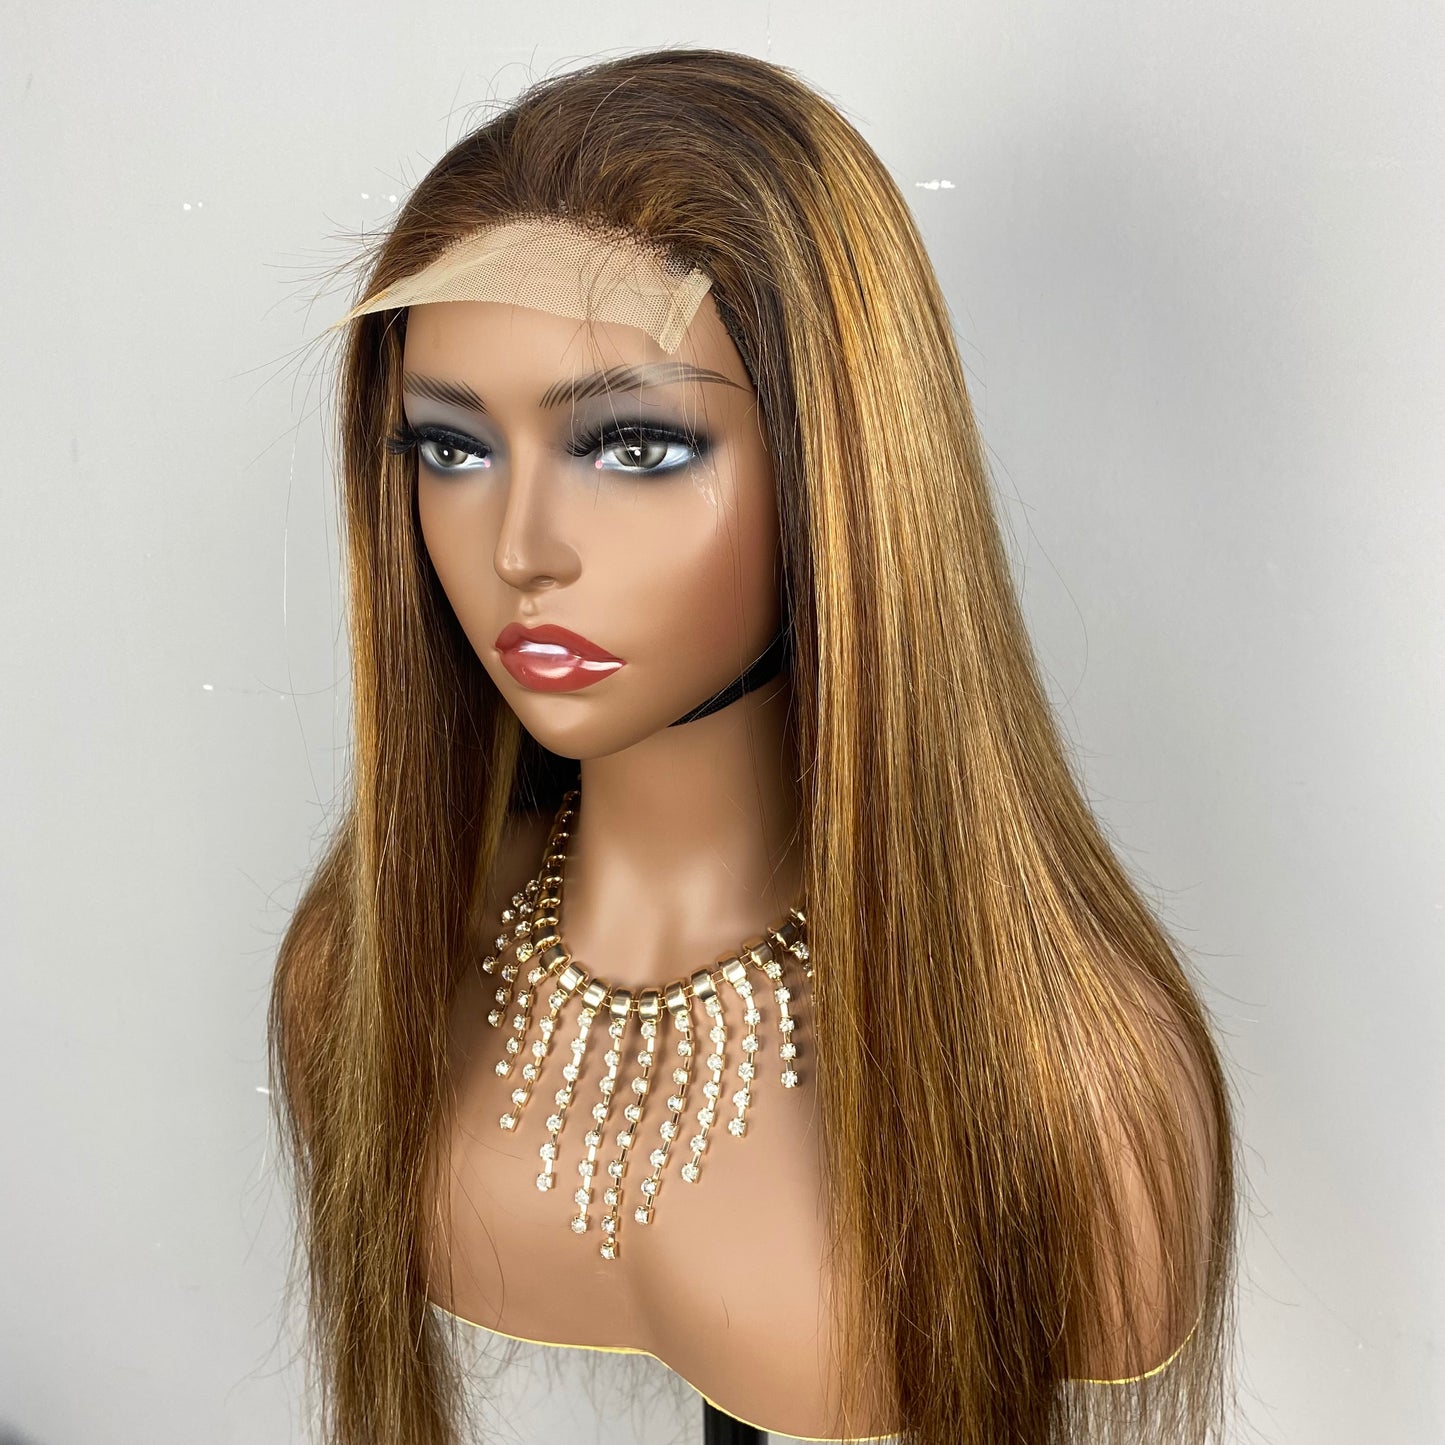 High Light Piano 4x4 Lace Remy Human Hair Straight Wigs